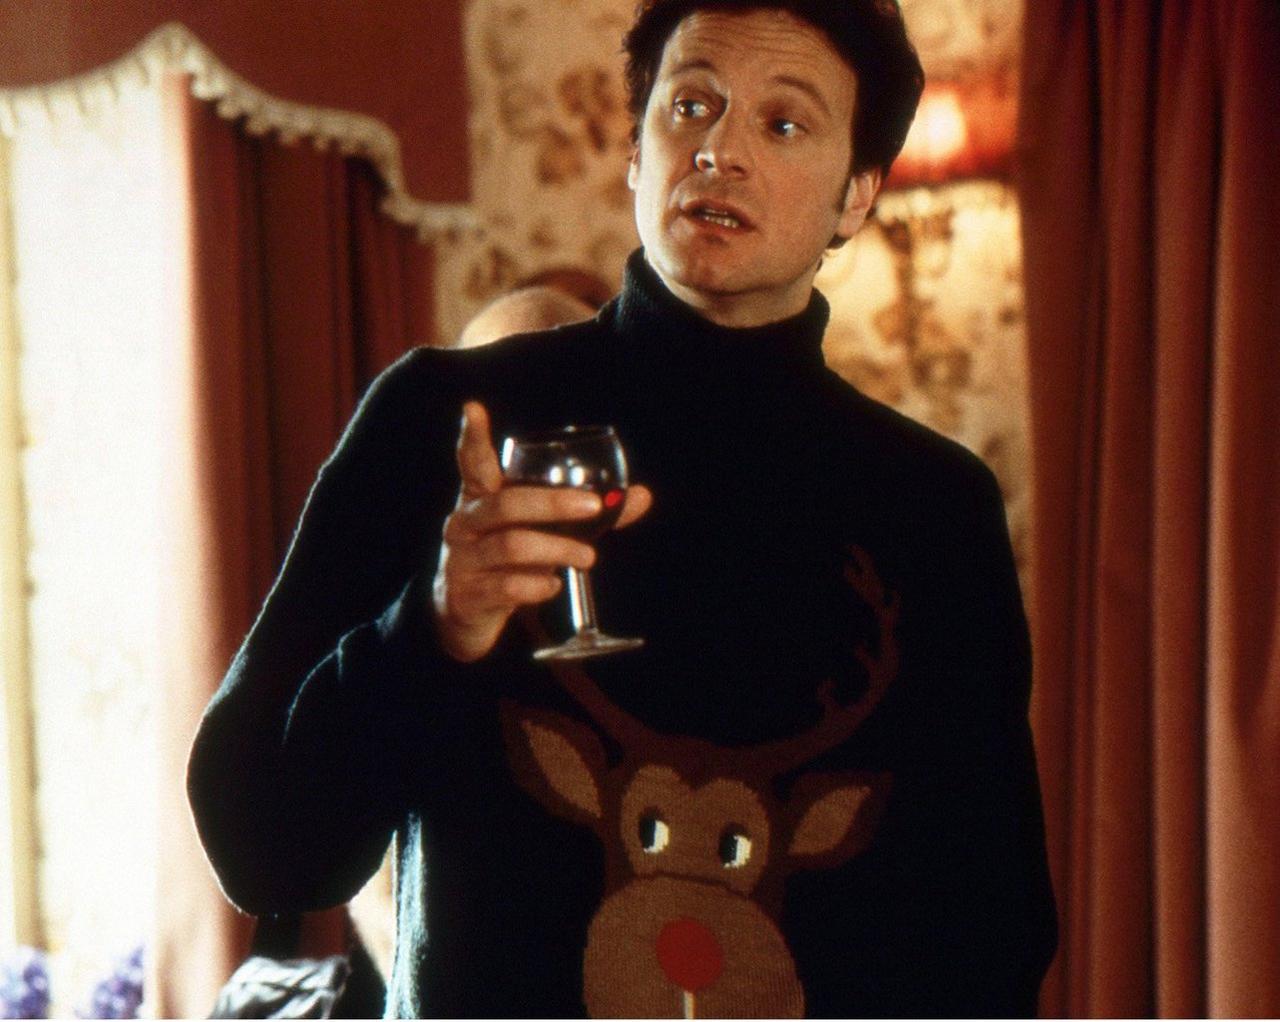 Colin Firth in Movie Still: Talking in Ugly Christmas Sweater, Dark Green with Reindeer Graphic, Red Wine in Hand